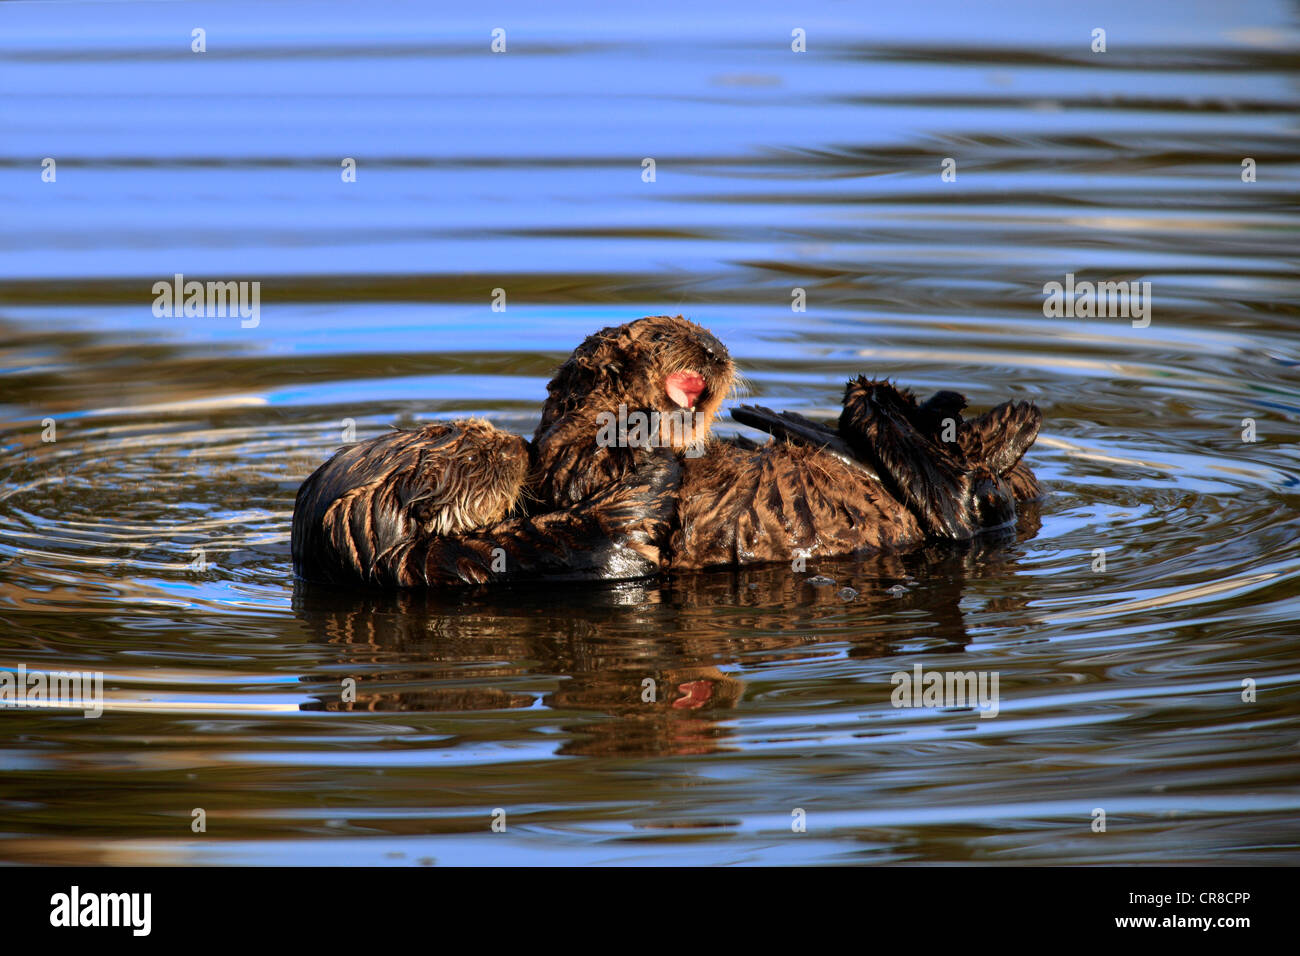 Sea otters (Enhydra lutris), mother with young, in the water, Monterey, California, USA Stock Photo